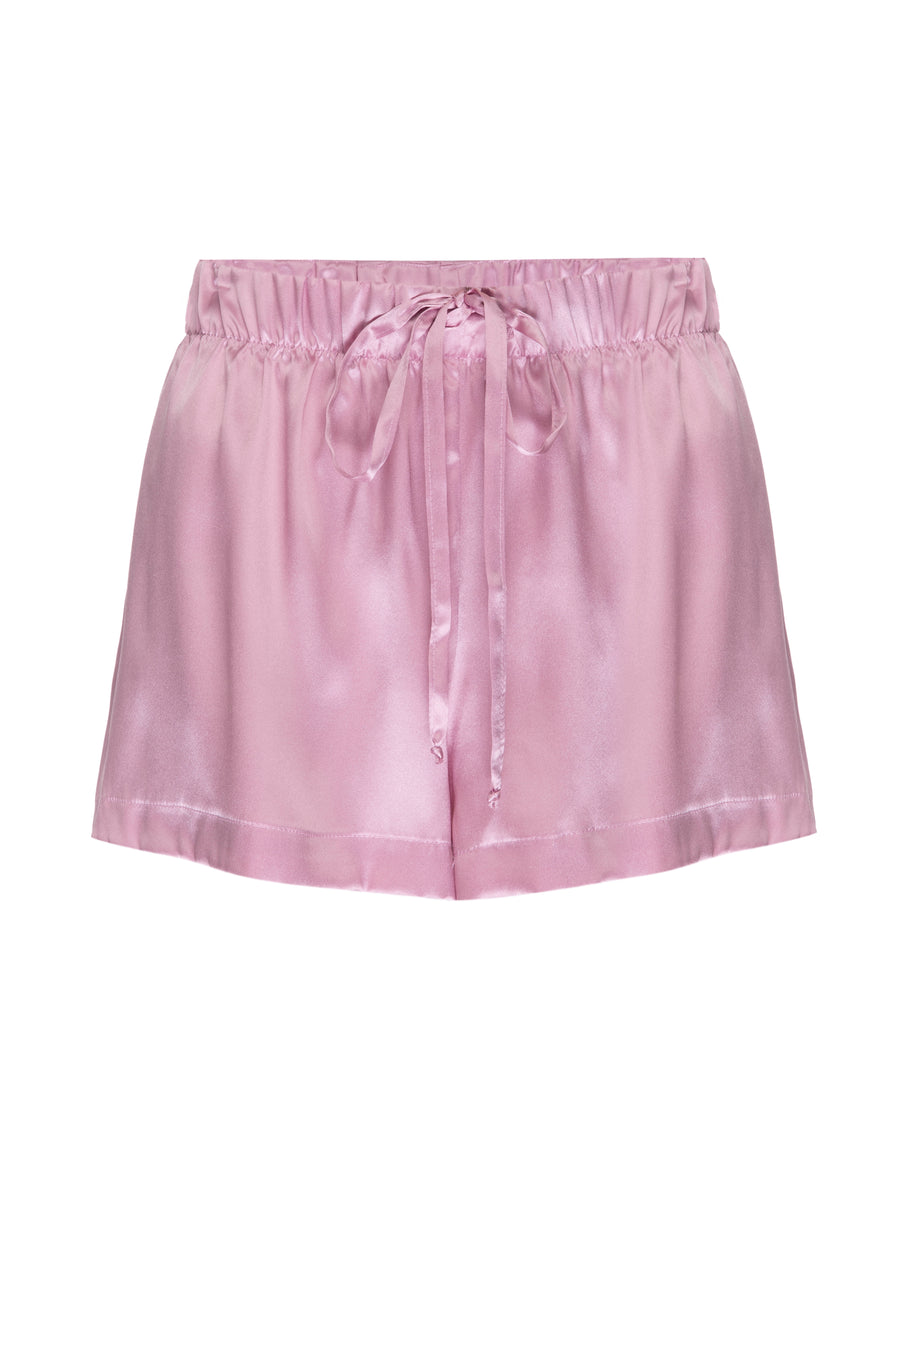 Silk Charmeuse PJ Short: Orchid Pink